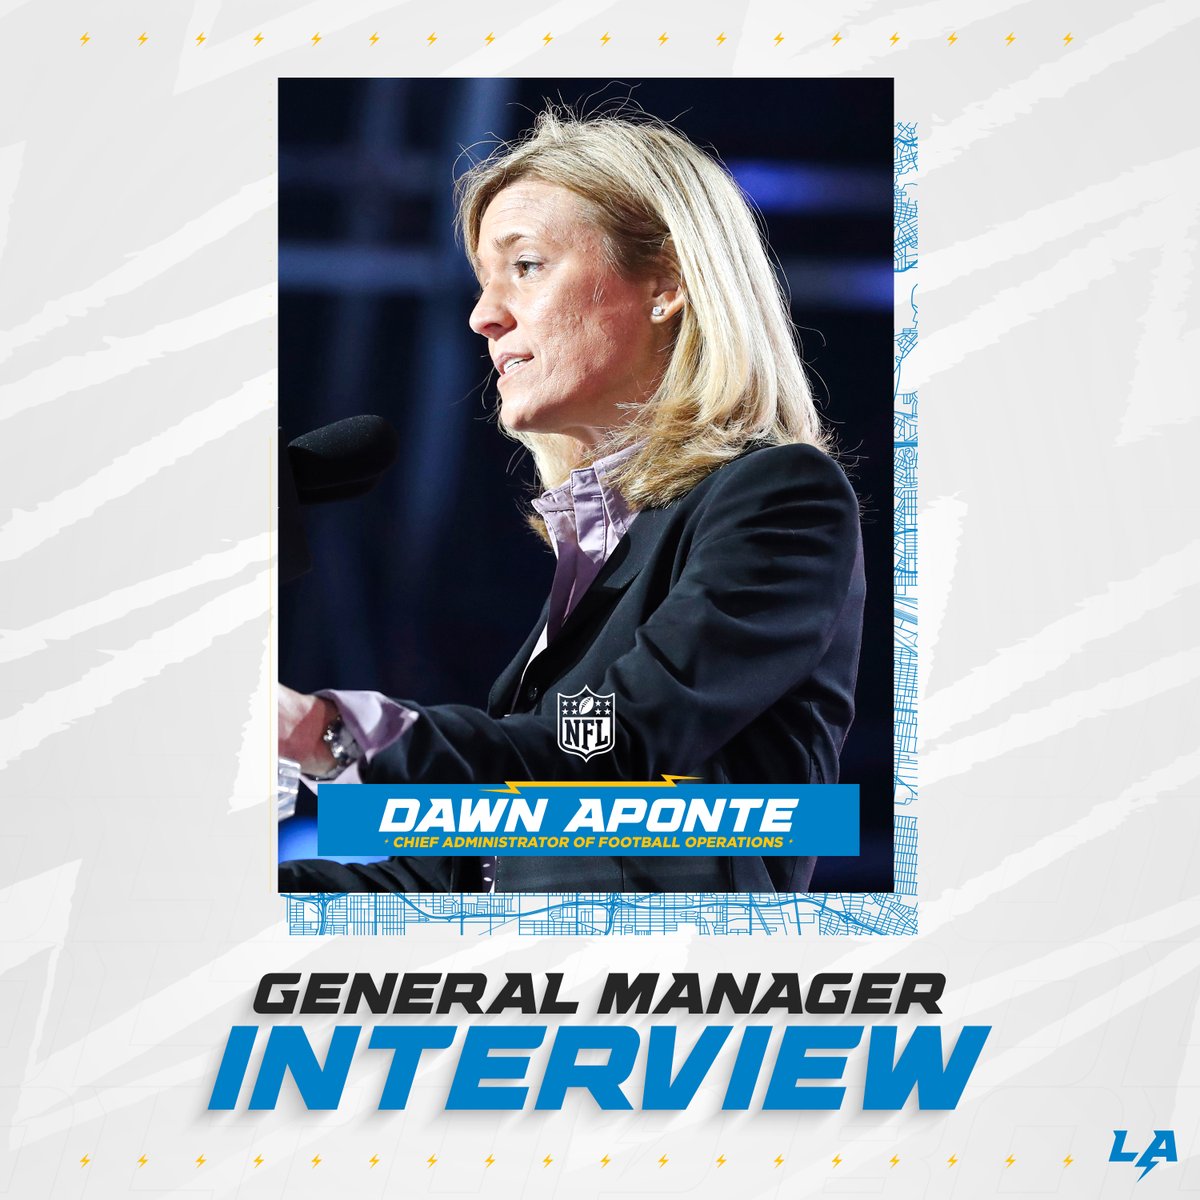 we’ve completed an interview with Dawn Aponte for general manager → chrg.rs/3HrWlpZ